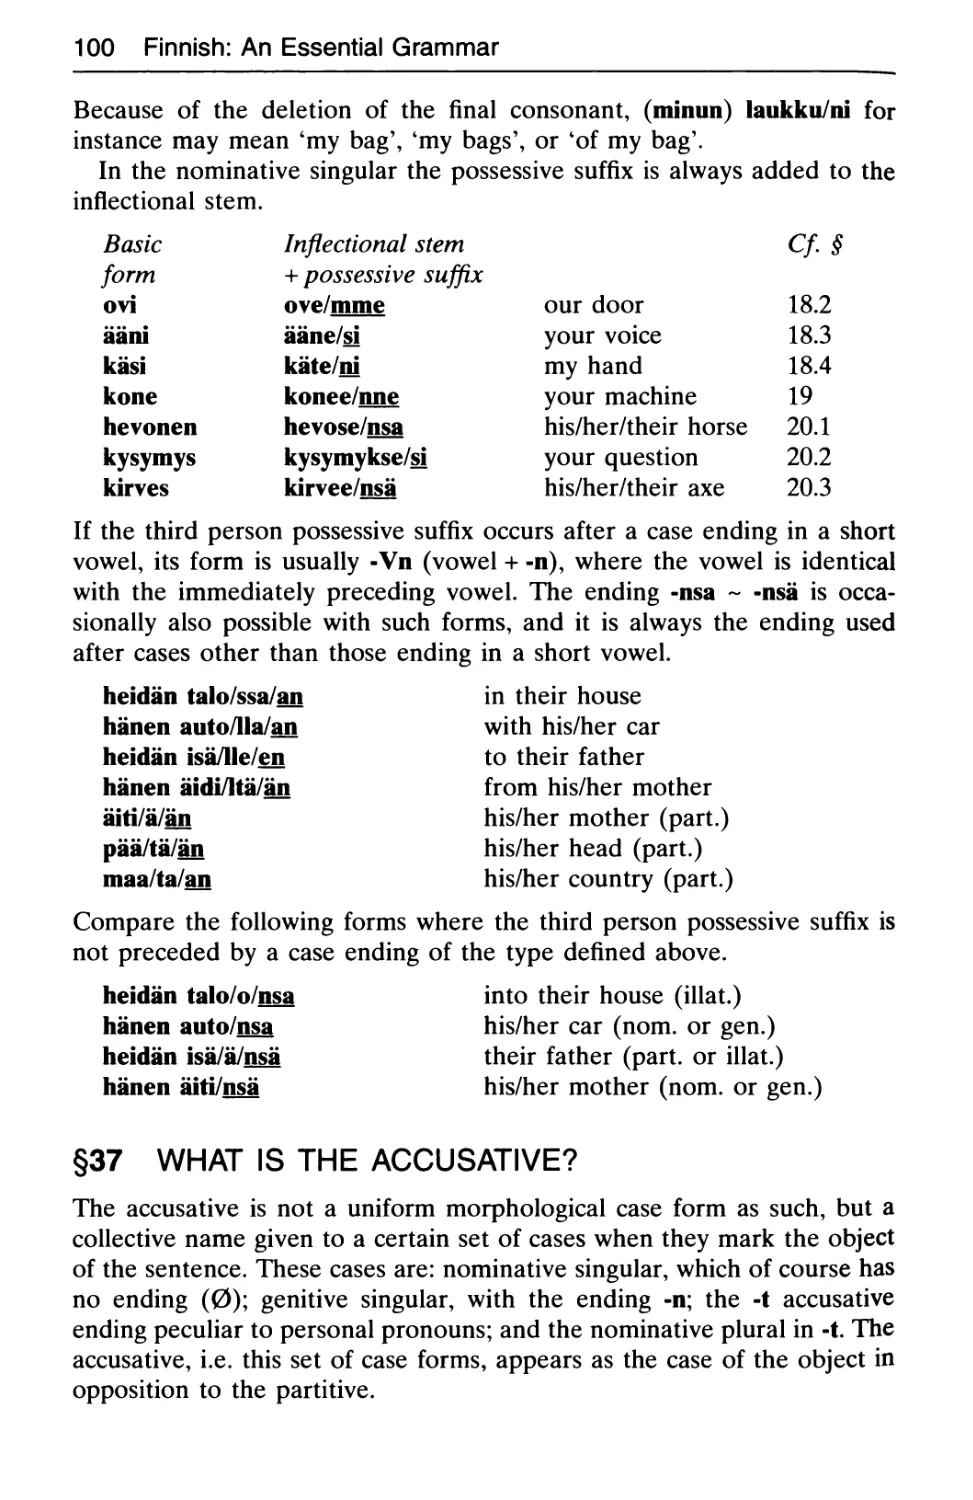 §37 What is the accusative?